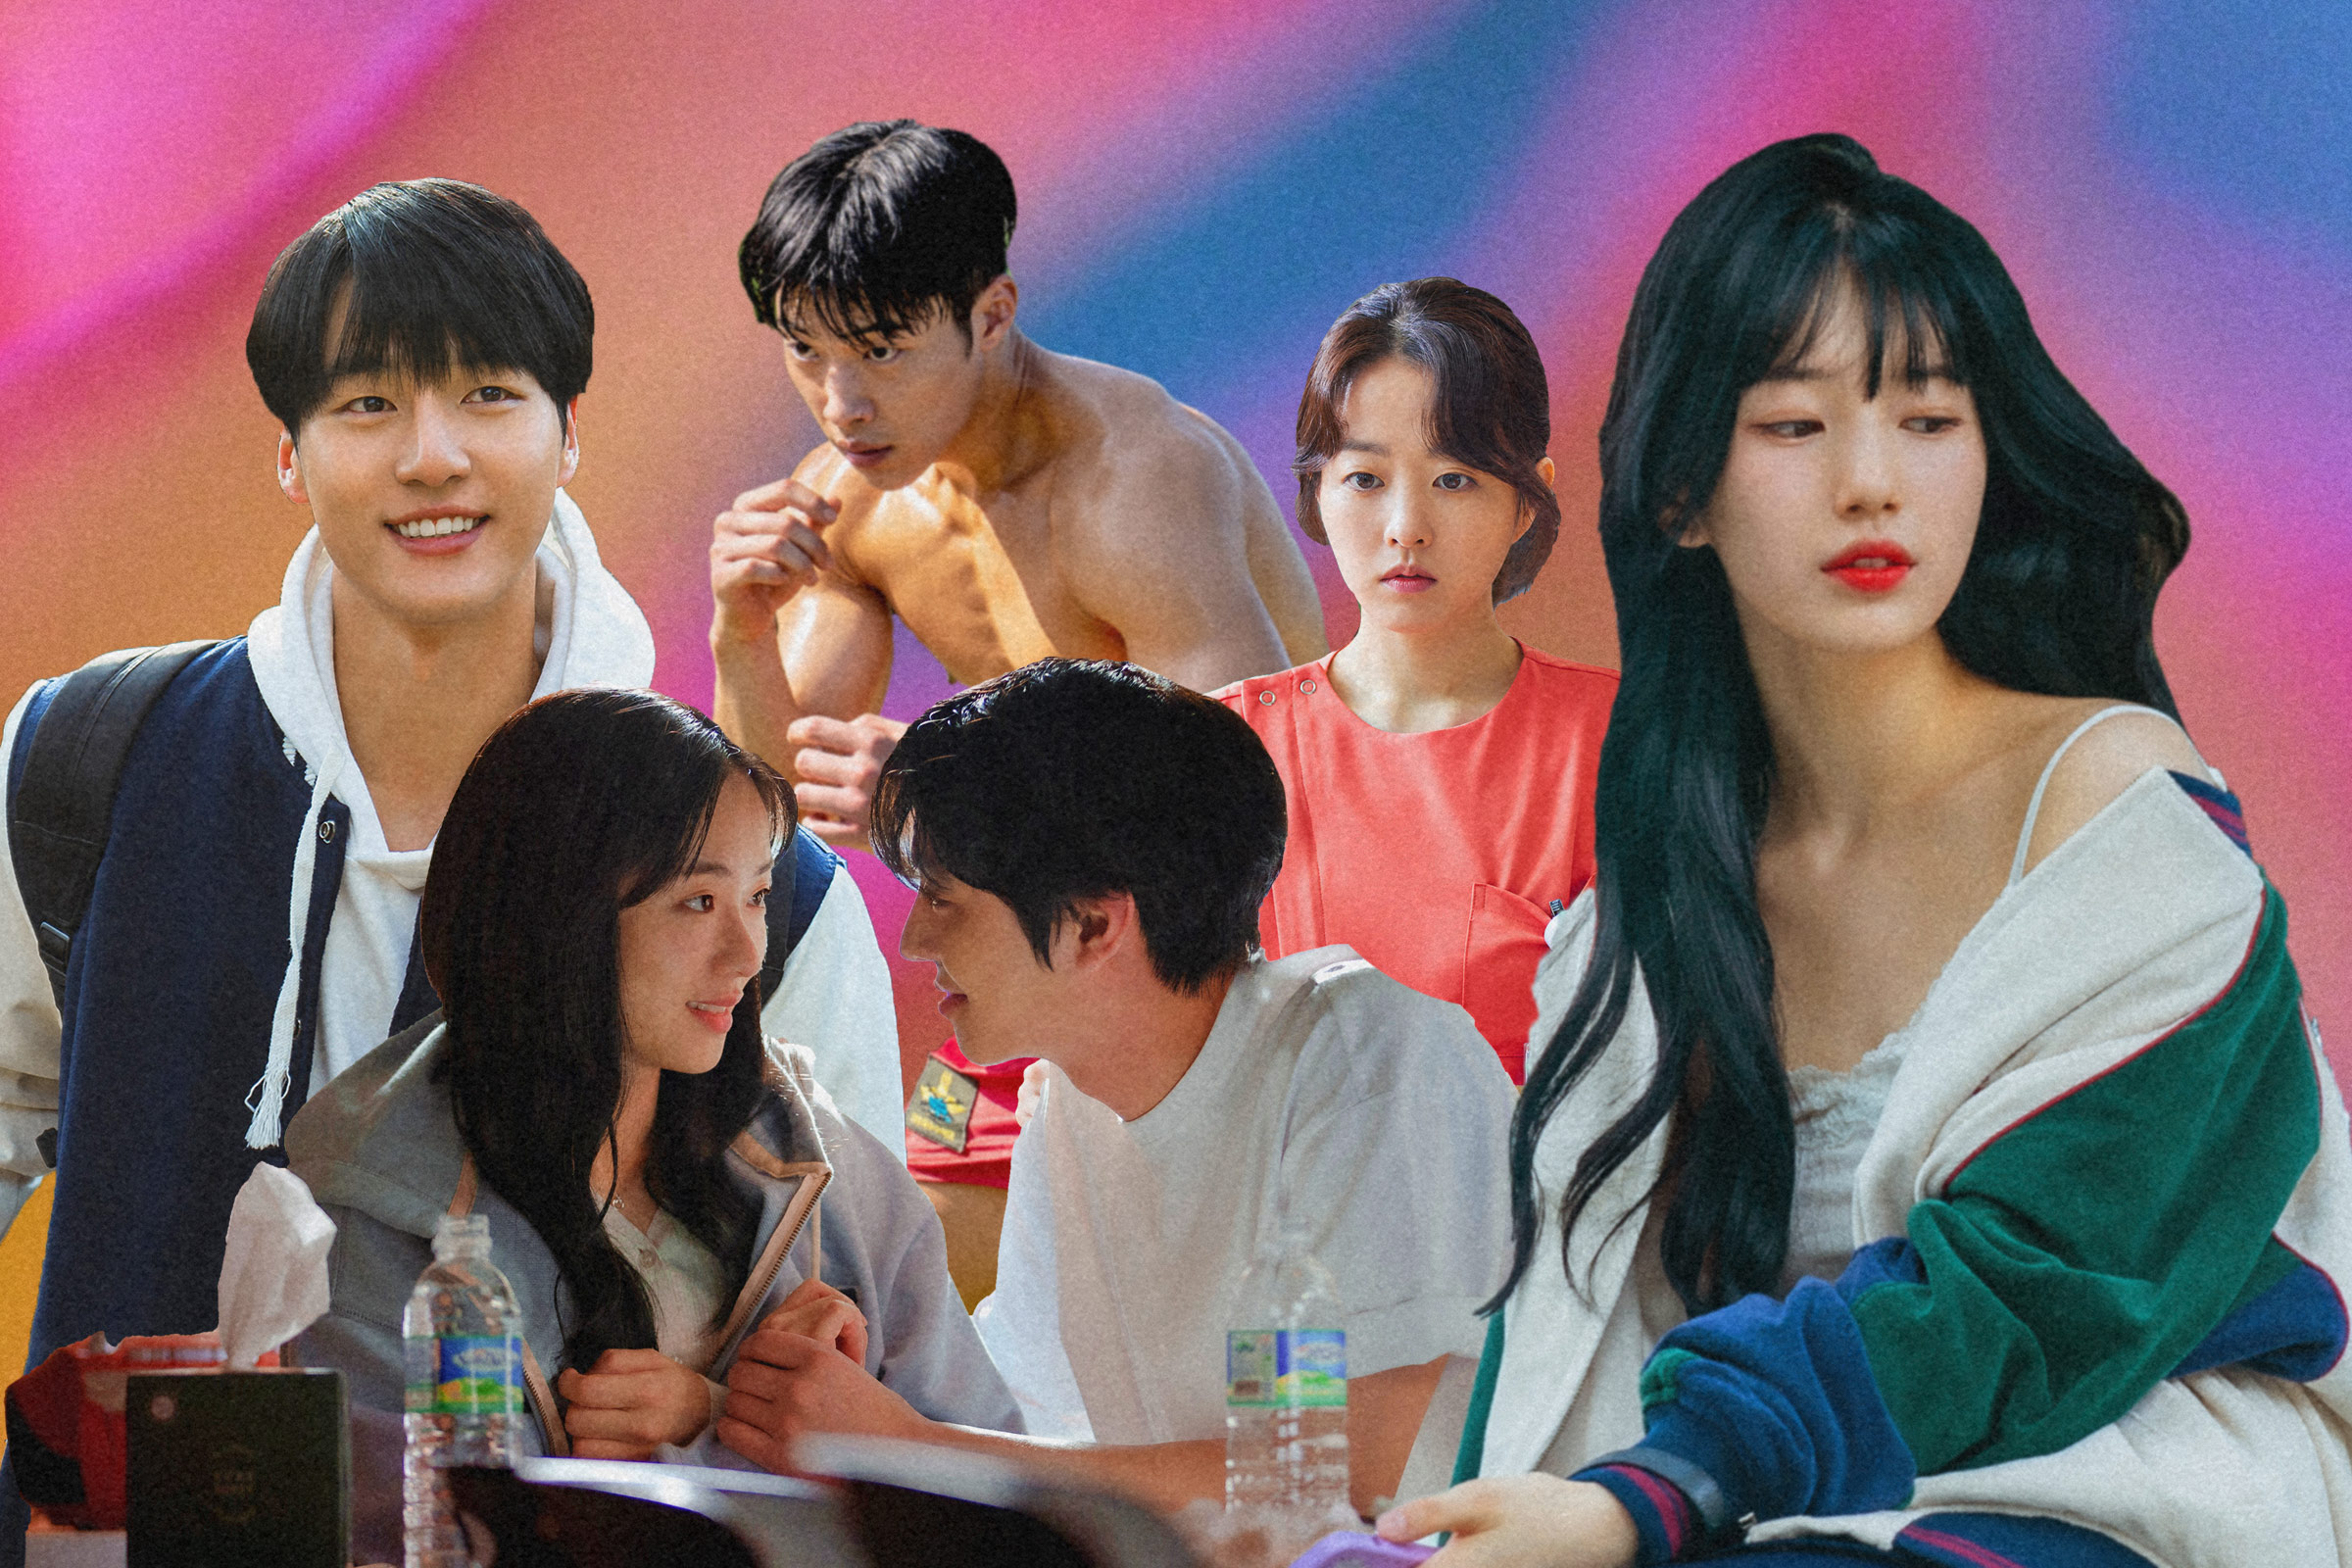 New seasons of your favorite K-Dramas are out! Time to bring out